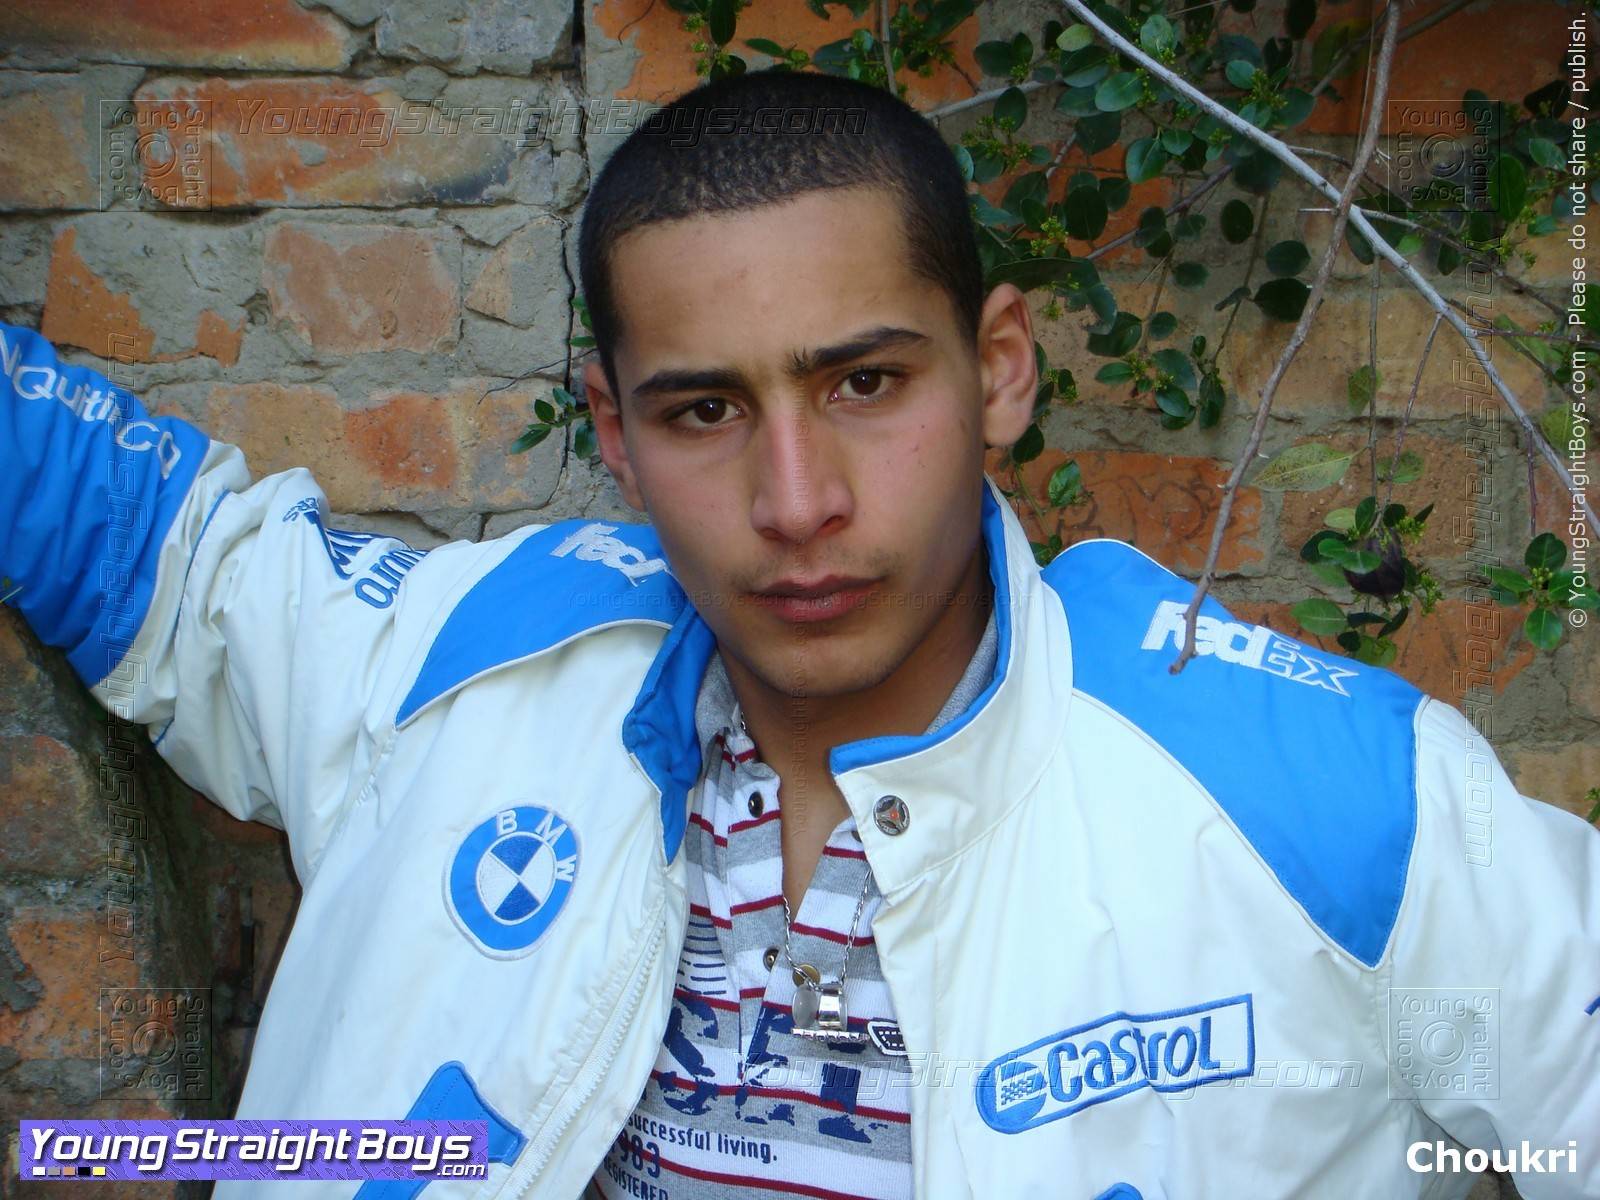 Here, Choukri (a cute 'rogue' Arab straight boy) is posing in front of an old wall